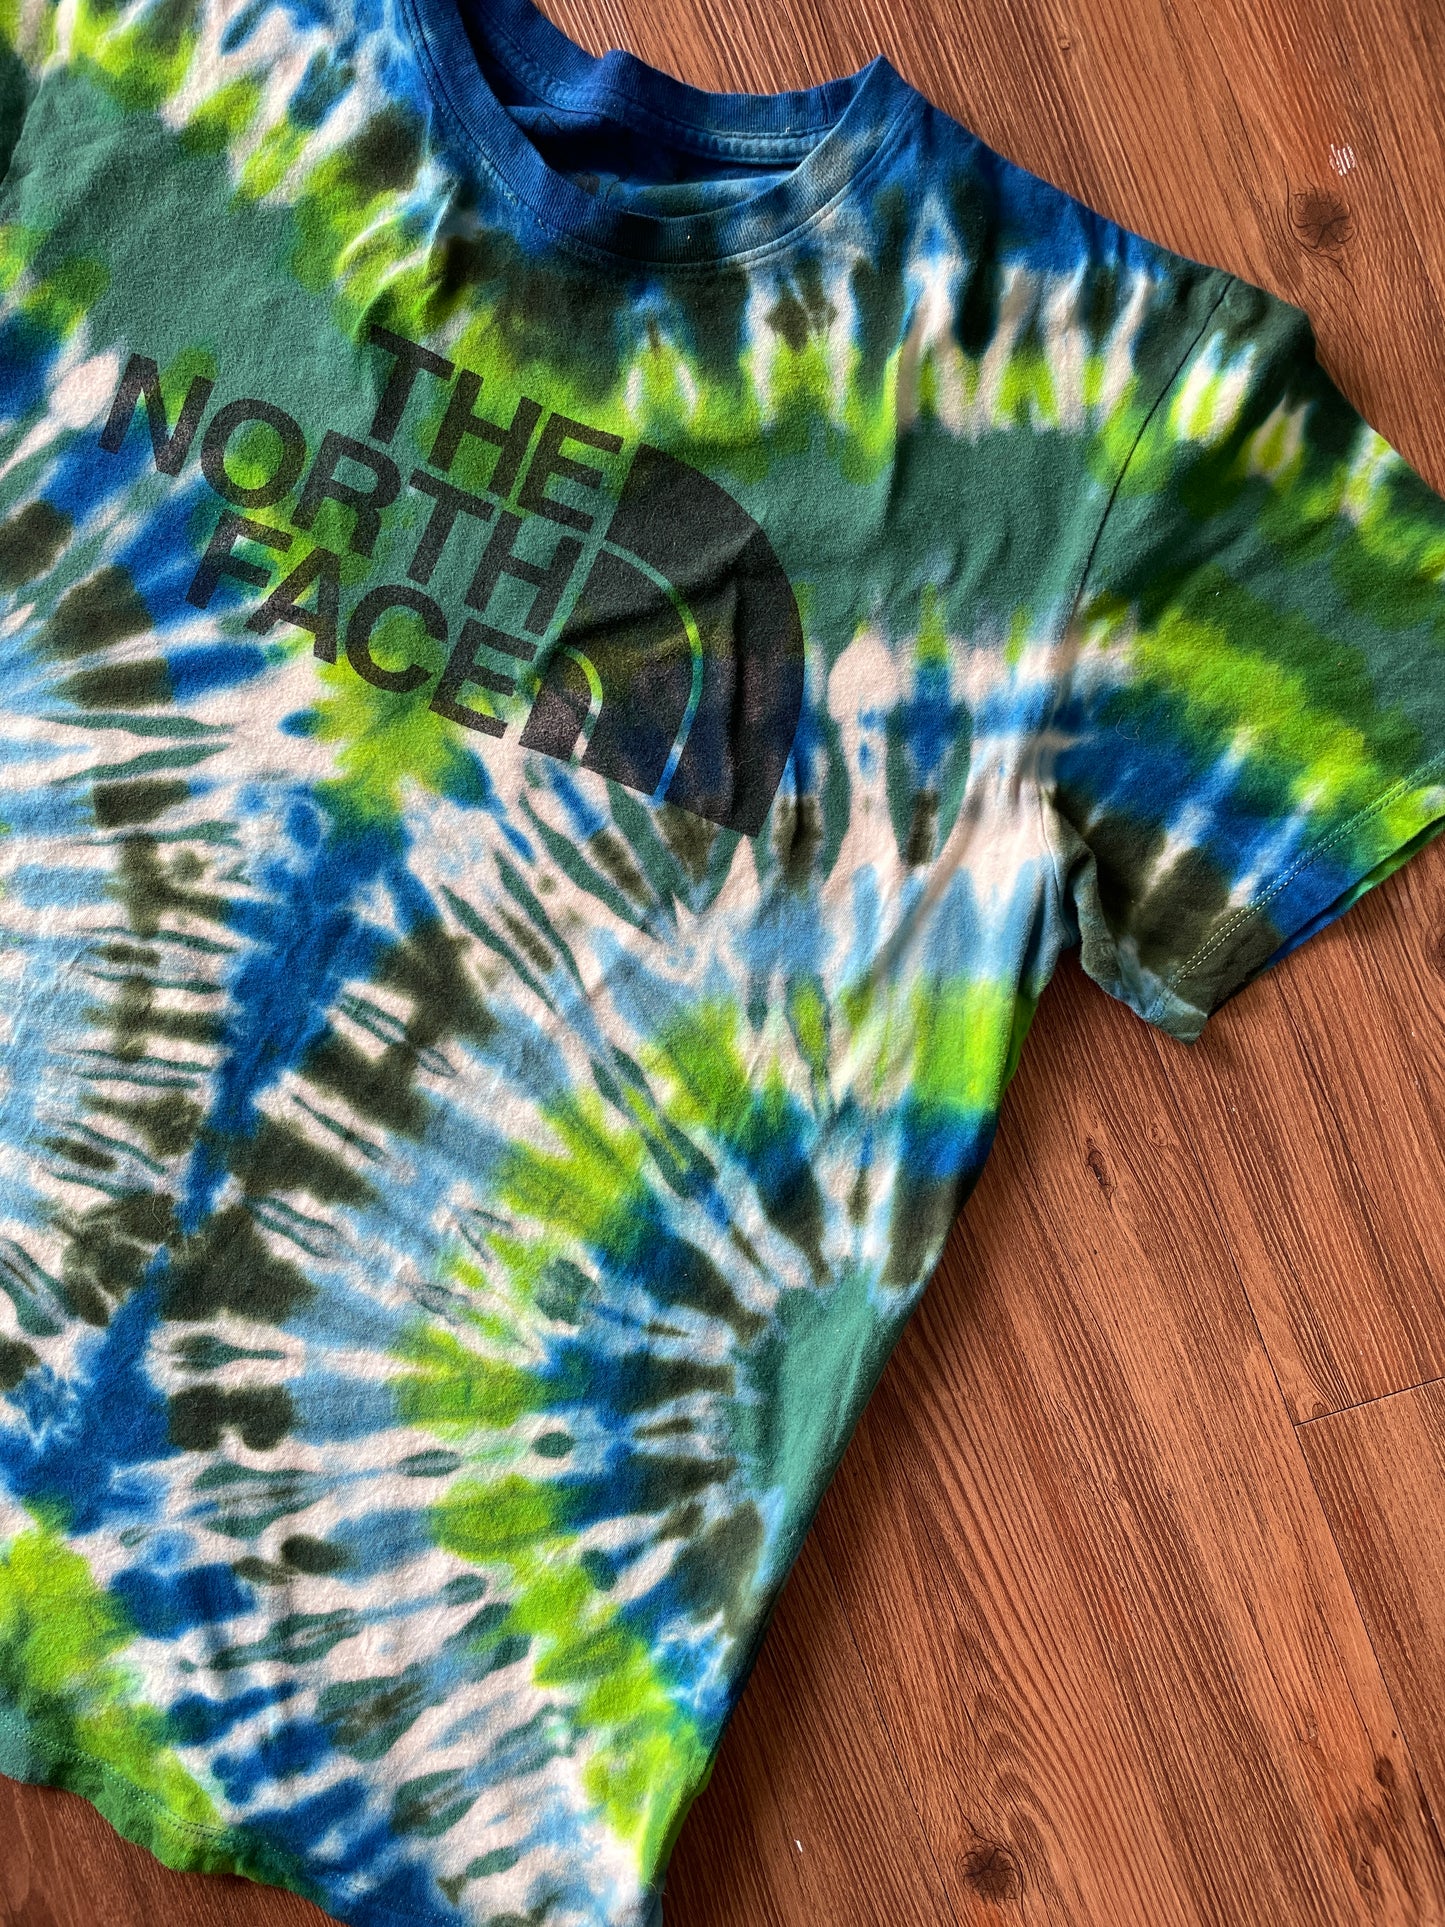 LARGE Men’s The North Face Half Dome Tie Dye T-Shirt | Green White and Blue TNF Reverse Tie Dye Short Sleeve